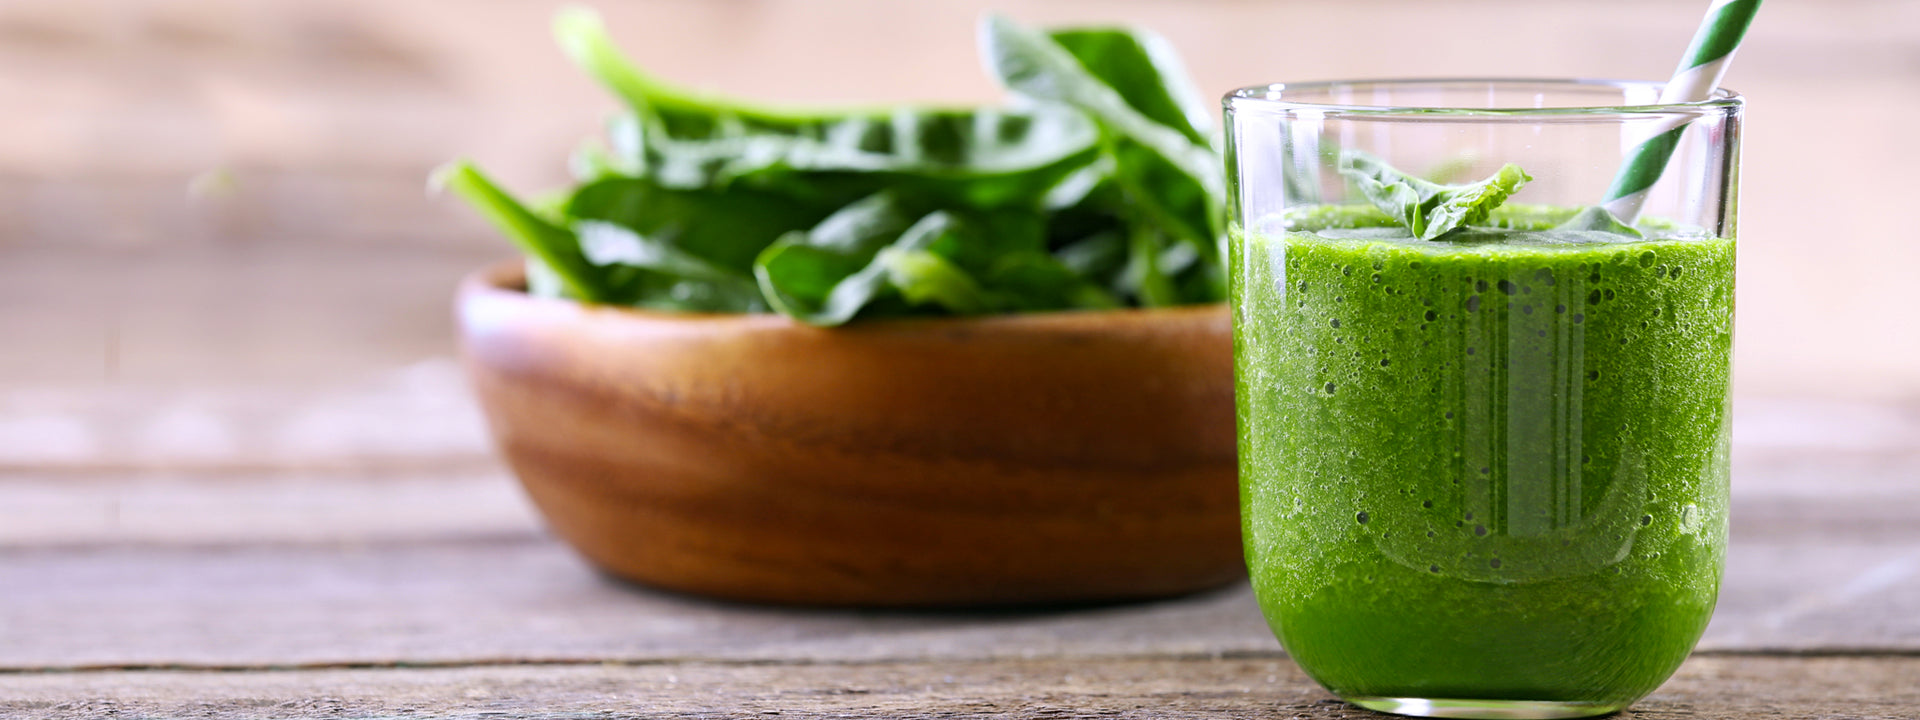 Recipe: Anti-Aging Green Blend – For glowing healthy skin.